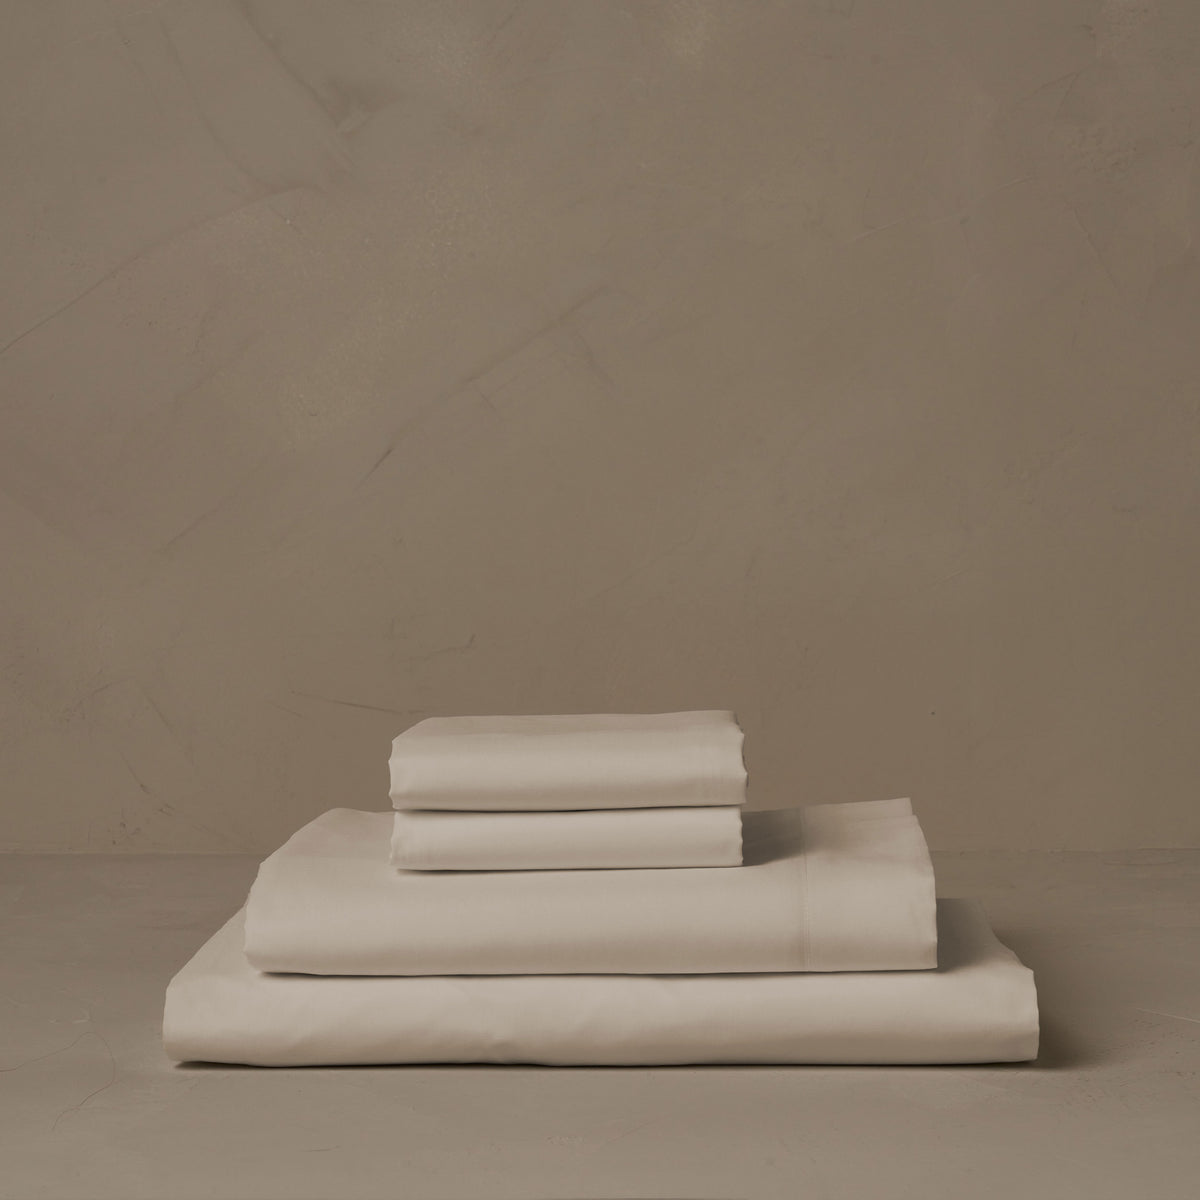 A stack of cool and crisp LETTO Giza Reserve Cotton Percale sheets in ivory, made in Italy. The sheet set includes a fitted sheet, a flat sheet, and a pair of pillowcases. data-image-id=